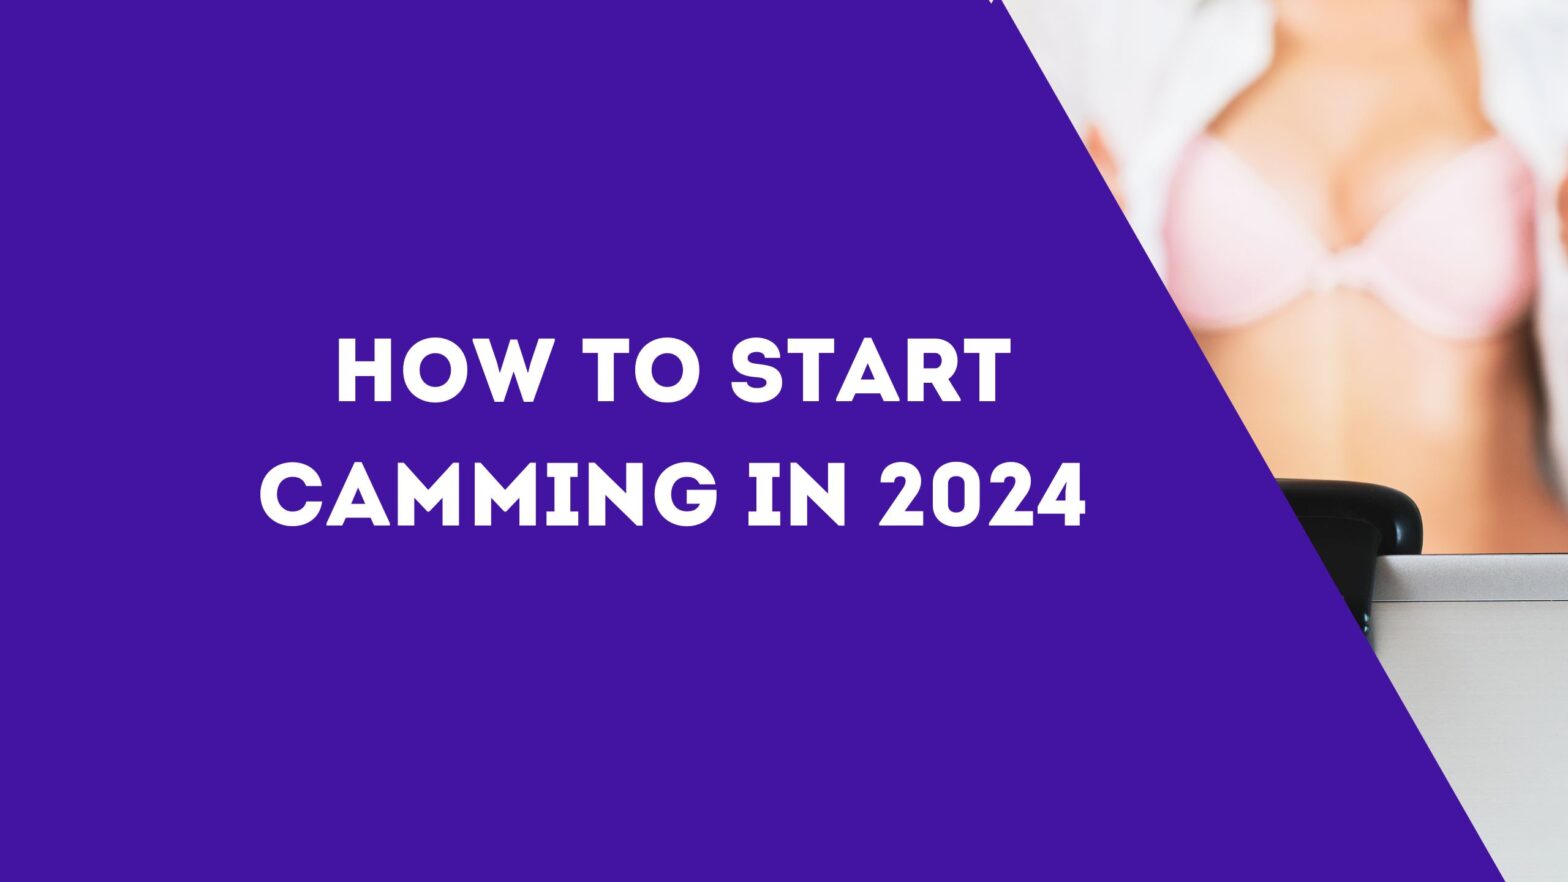 How to Start Camming in 2024